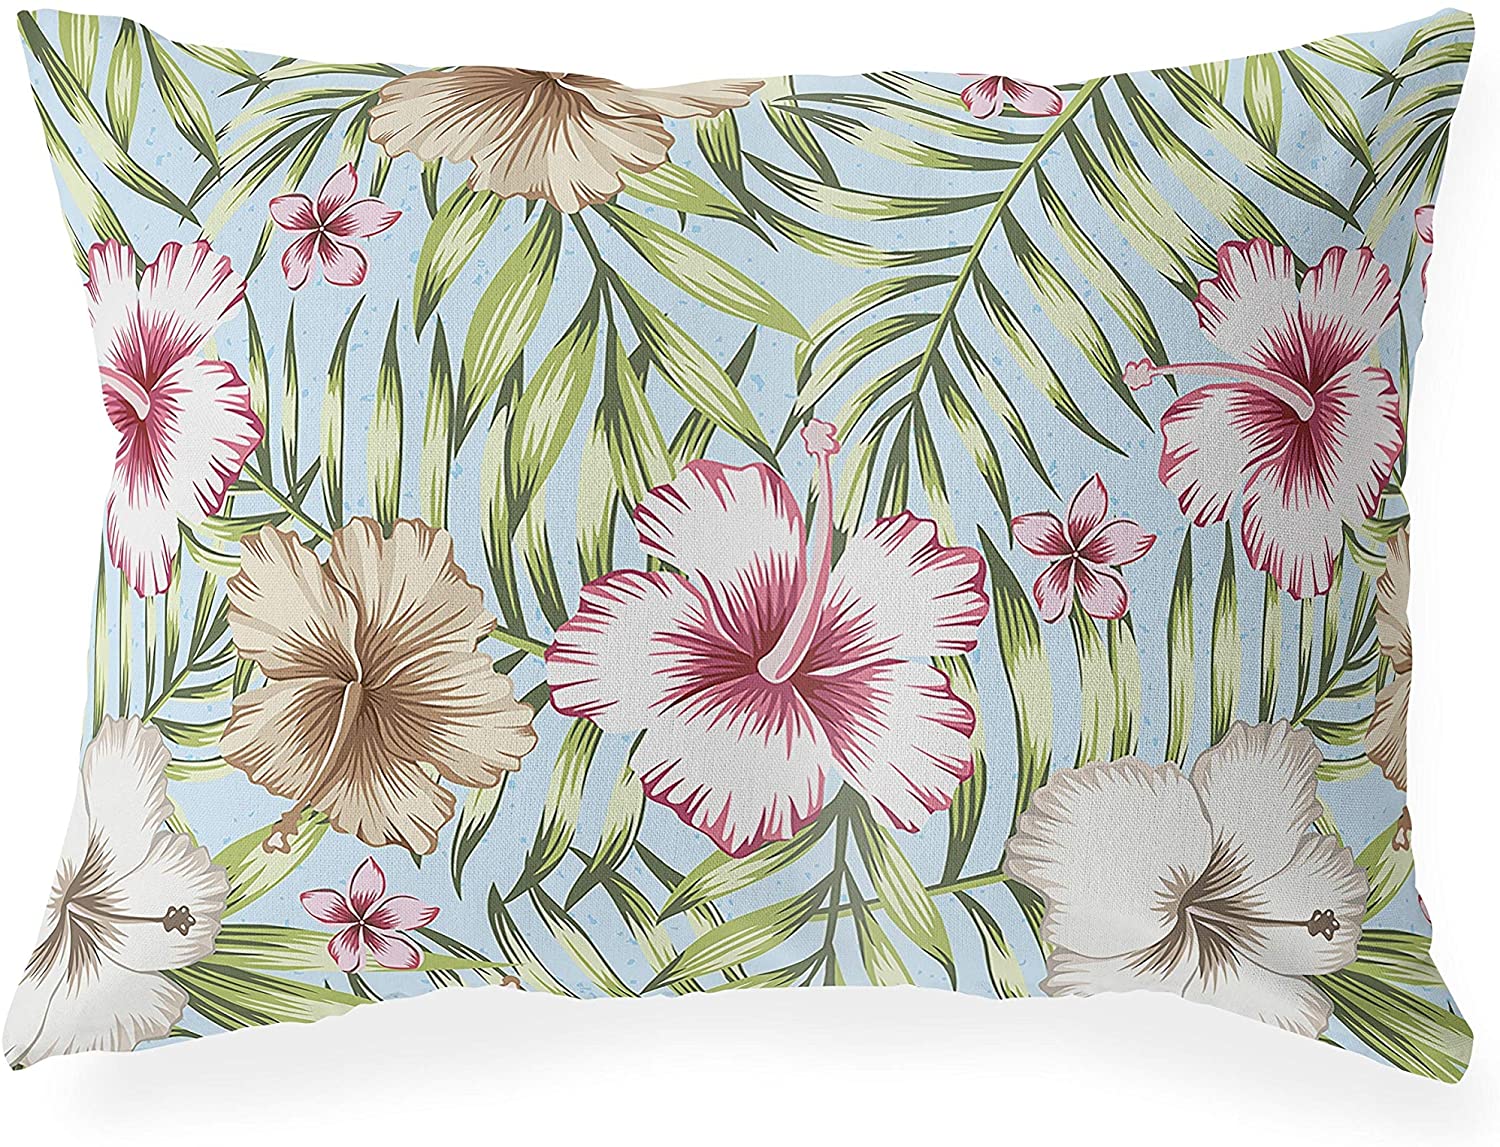 UKN Green Tropical Leaves Burgundy Hibiscus Lumbar Pillow Green Floral Tropical Polyester Single Removable Cover